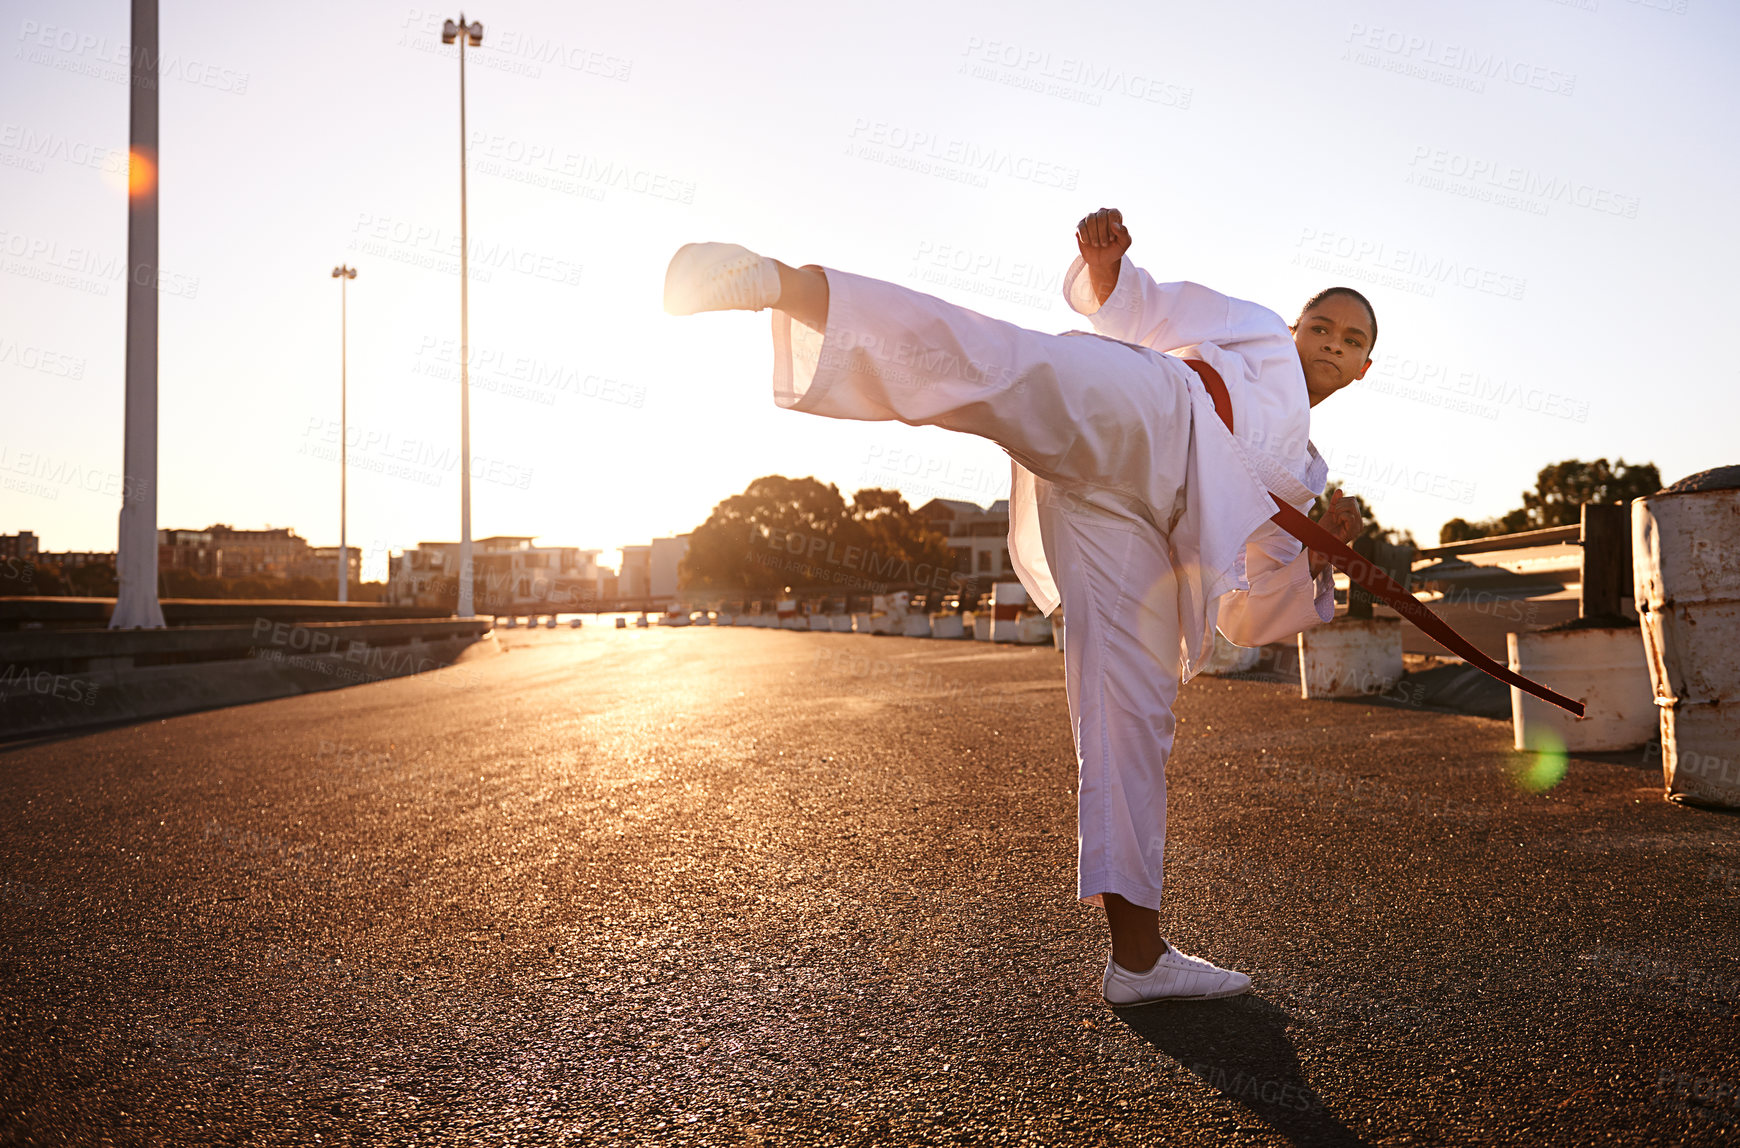 Buy stock photo A young woman in a gi practicing her kicks